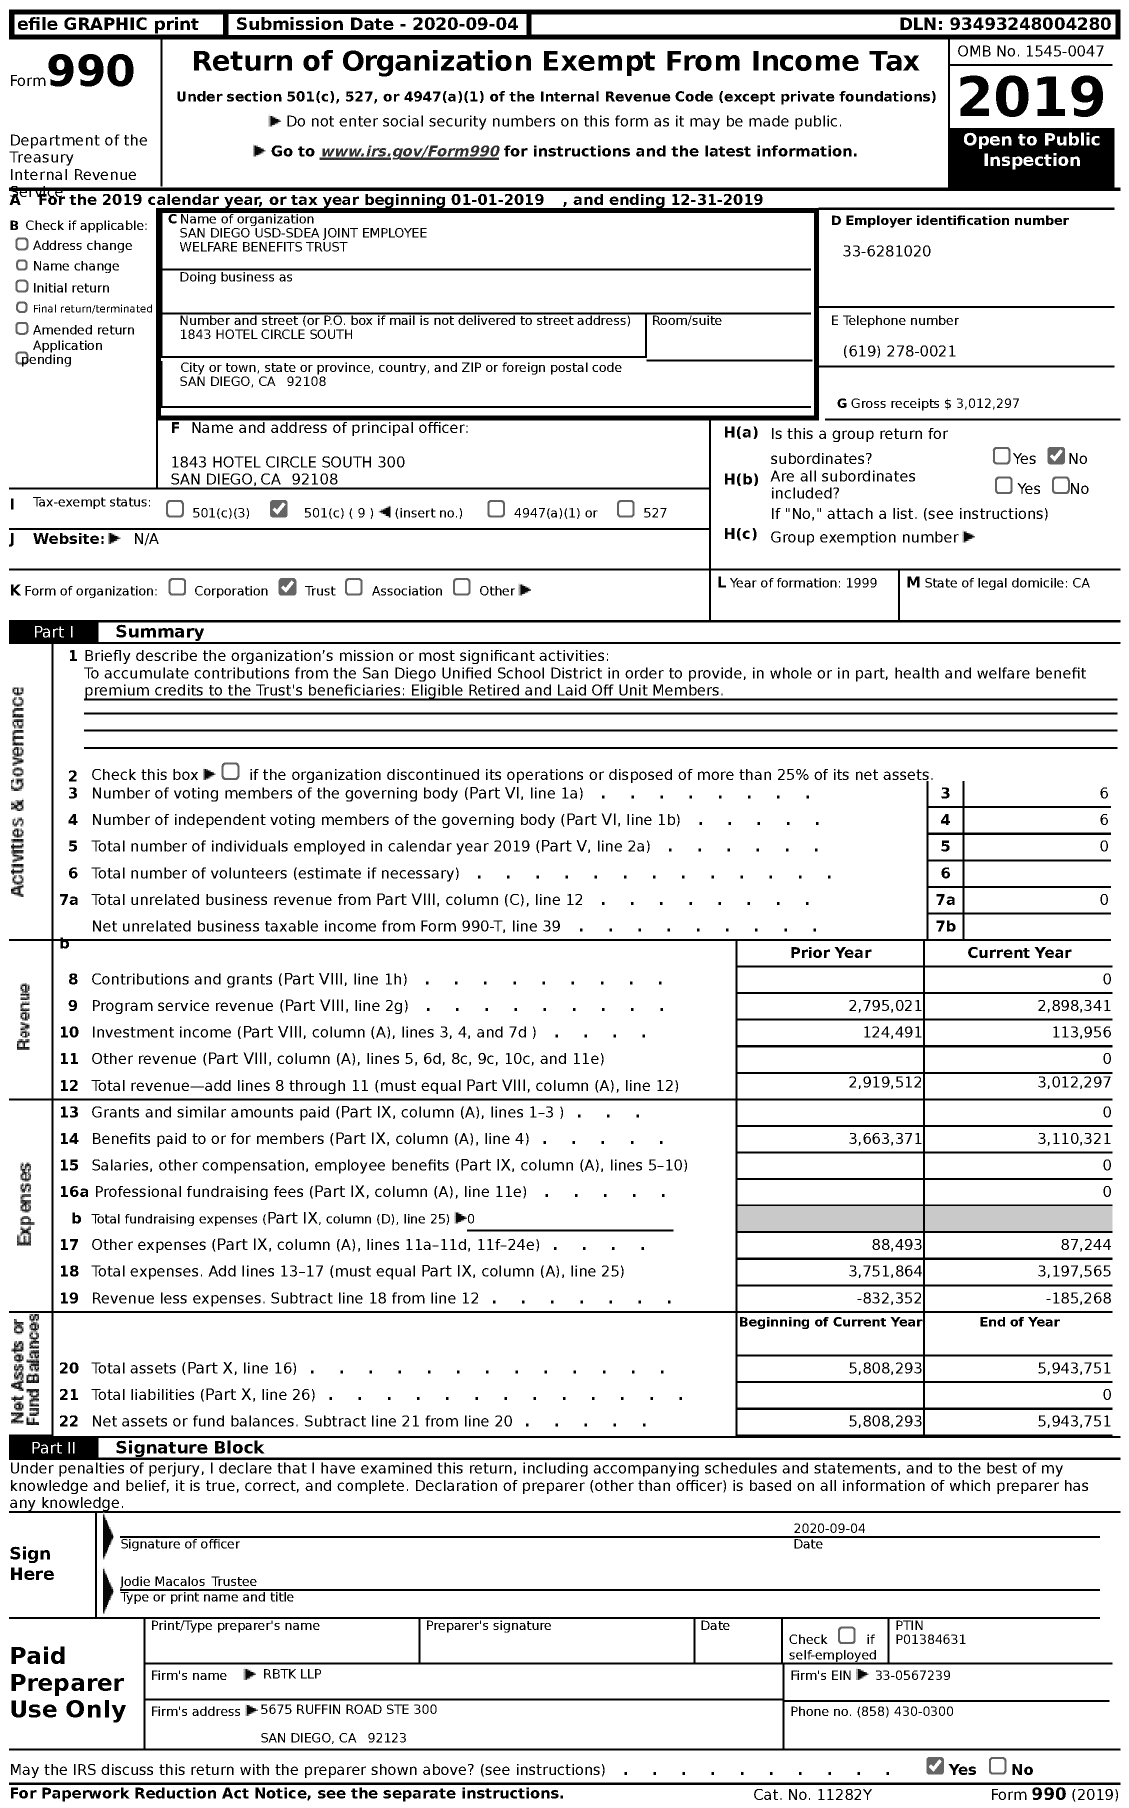 Image of first page of 2019 Form 990 for San Diego Usd-Sdea Joint Employee Welfare Benefits Trust